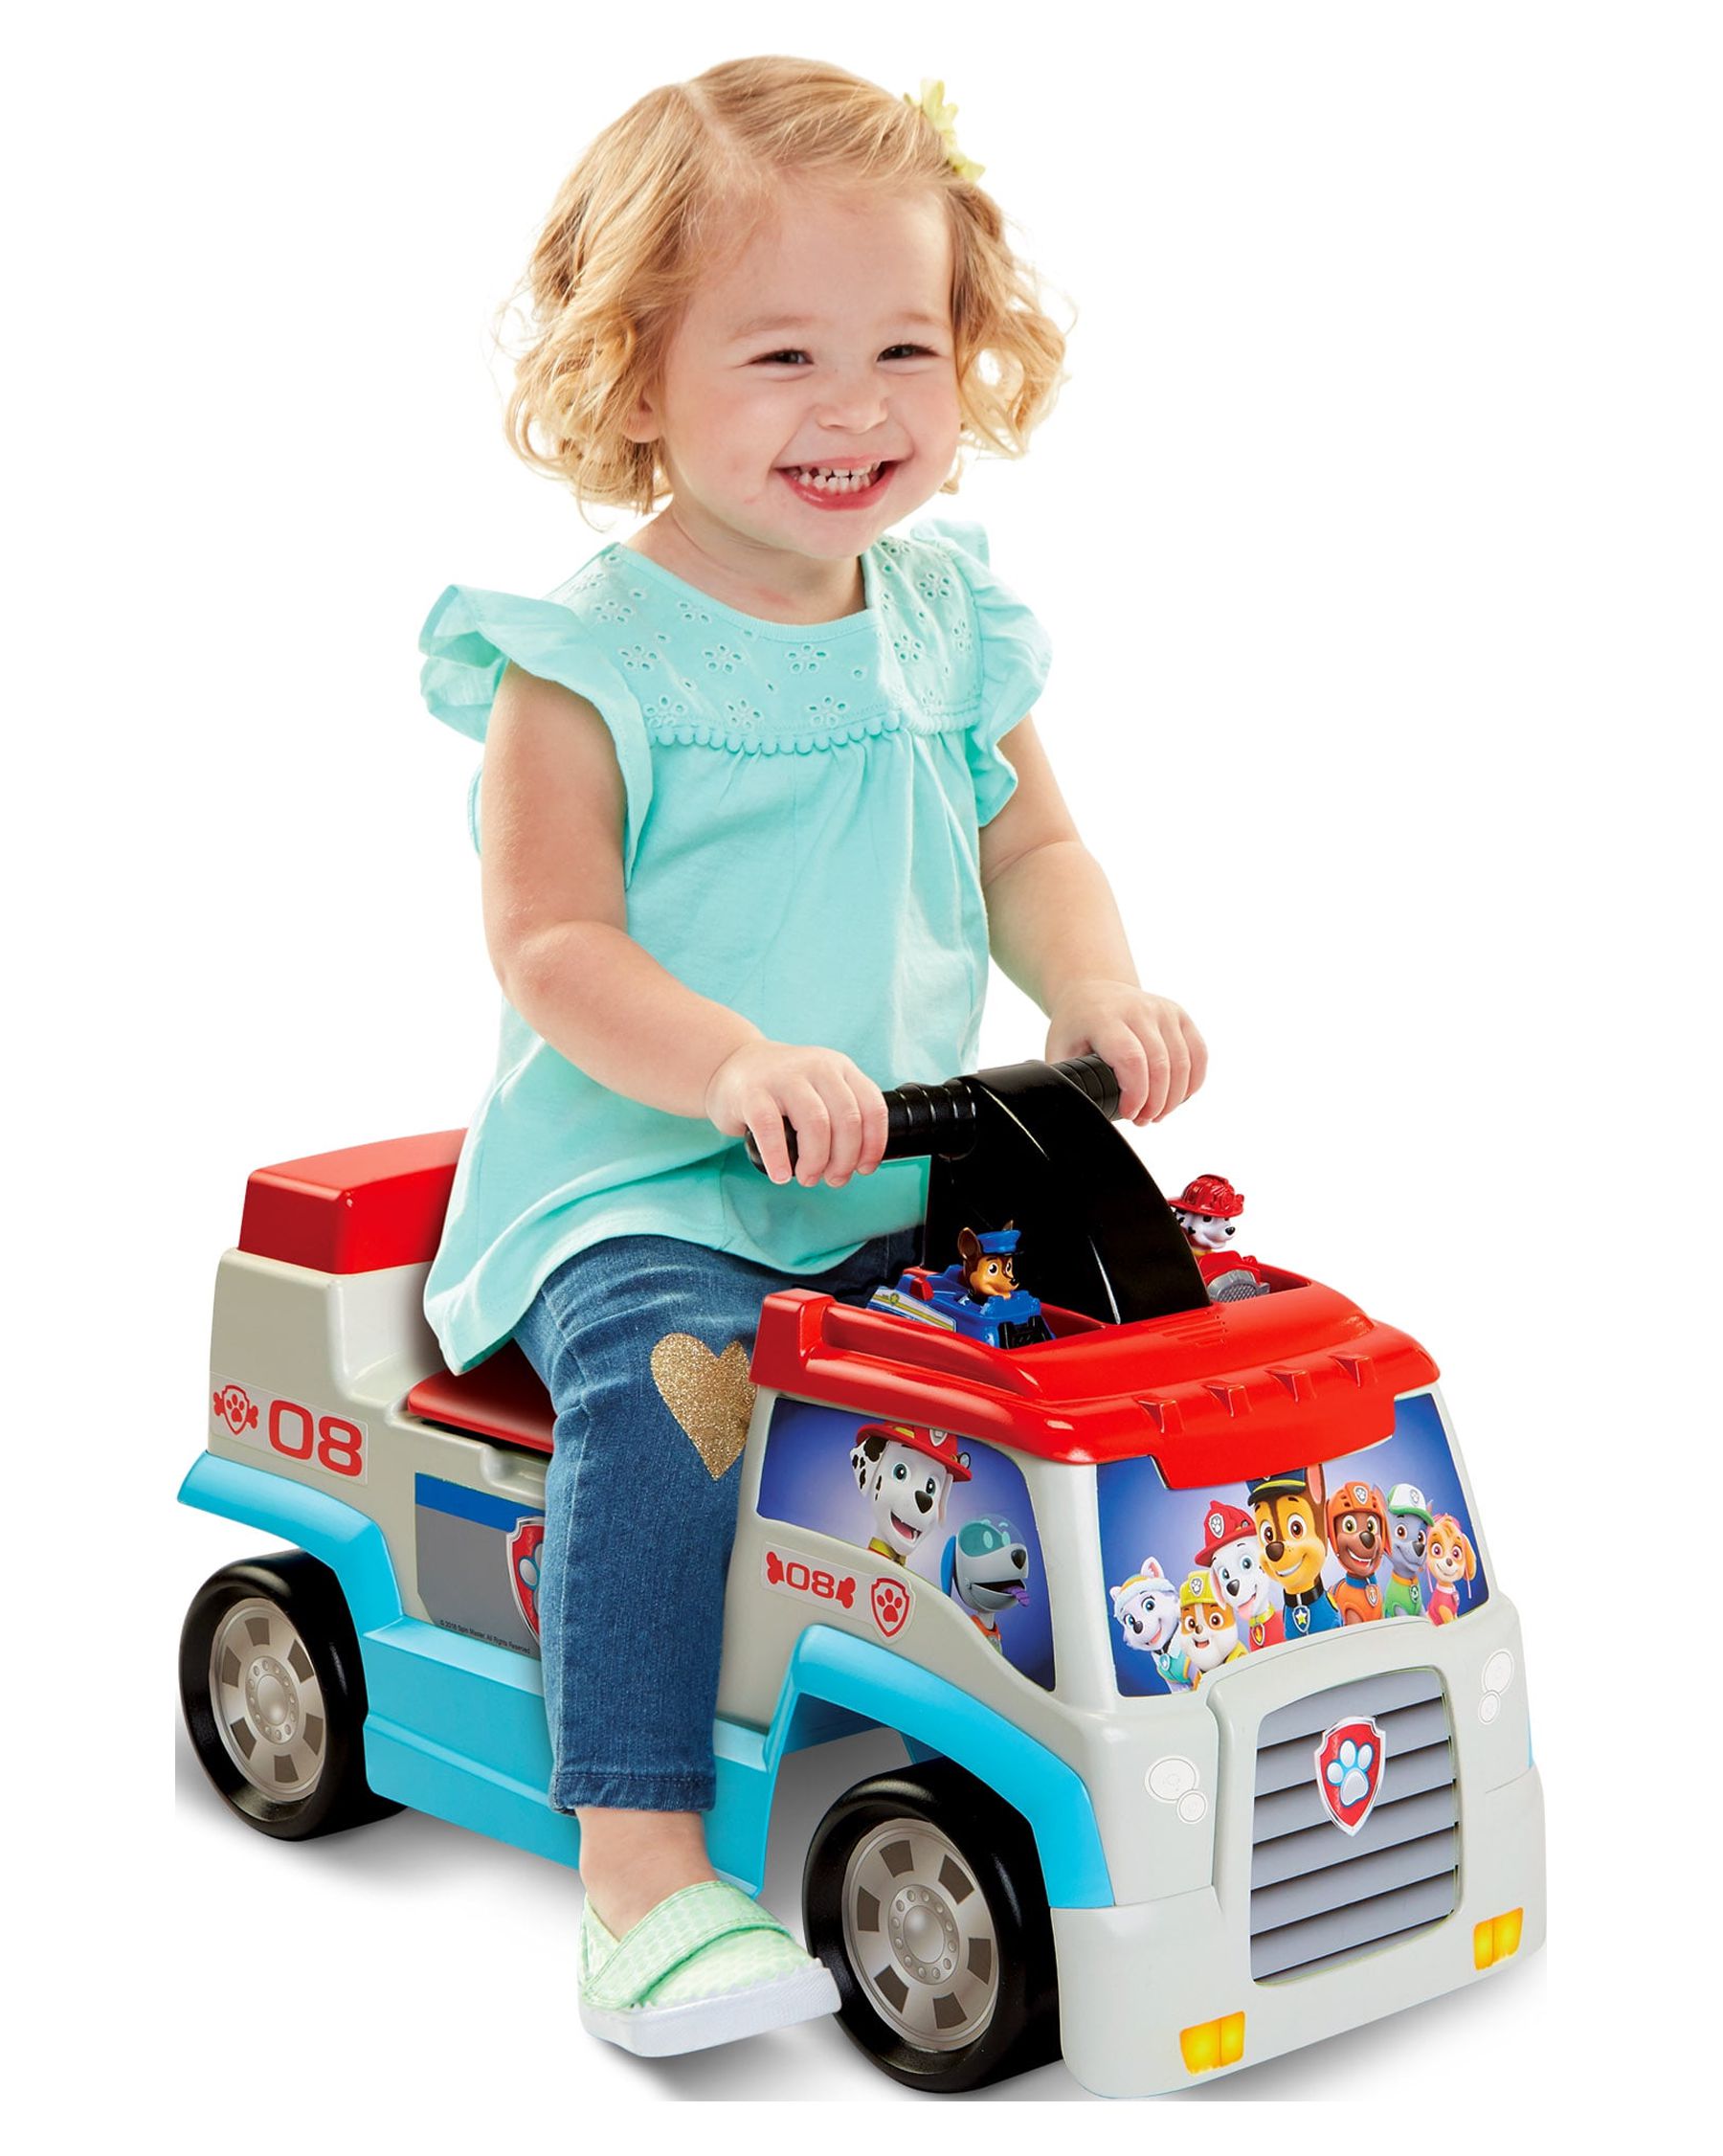 PAW Patrol Patroller Ride-On Includes Chase and Marshall Mini Vehicles - image 2 of 5